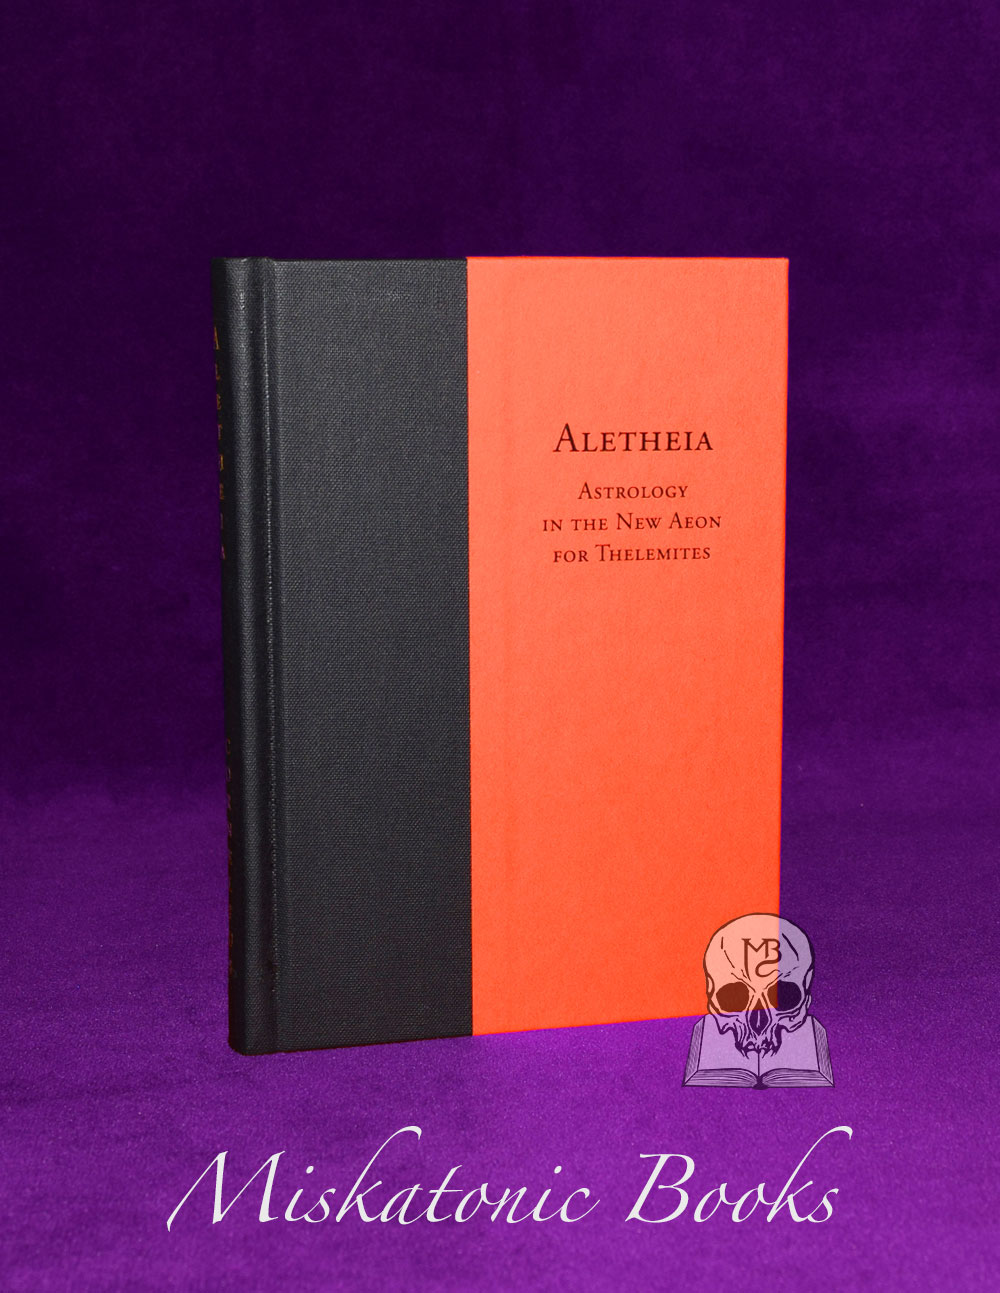 ALETHEIA. Astrology in the New Aeon for Thelemites by J. Edward Cornelius (Limited Edition Hardcover)